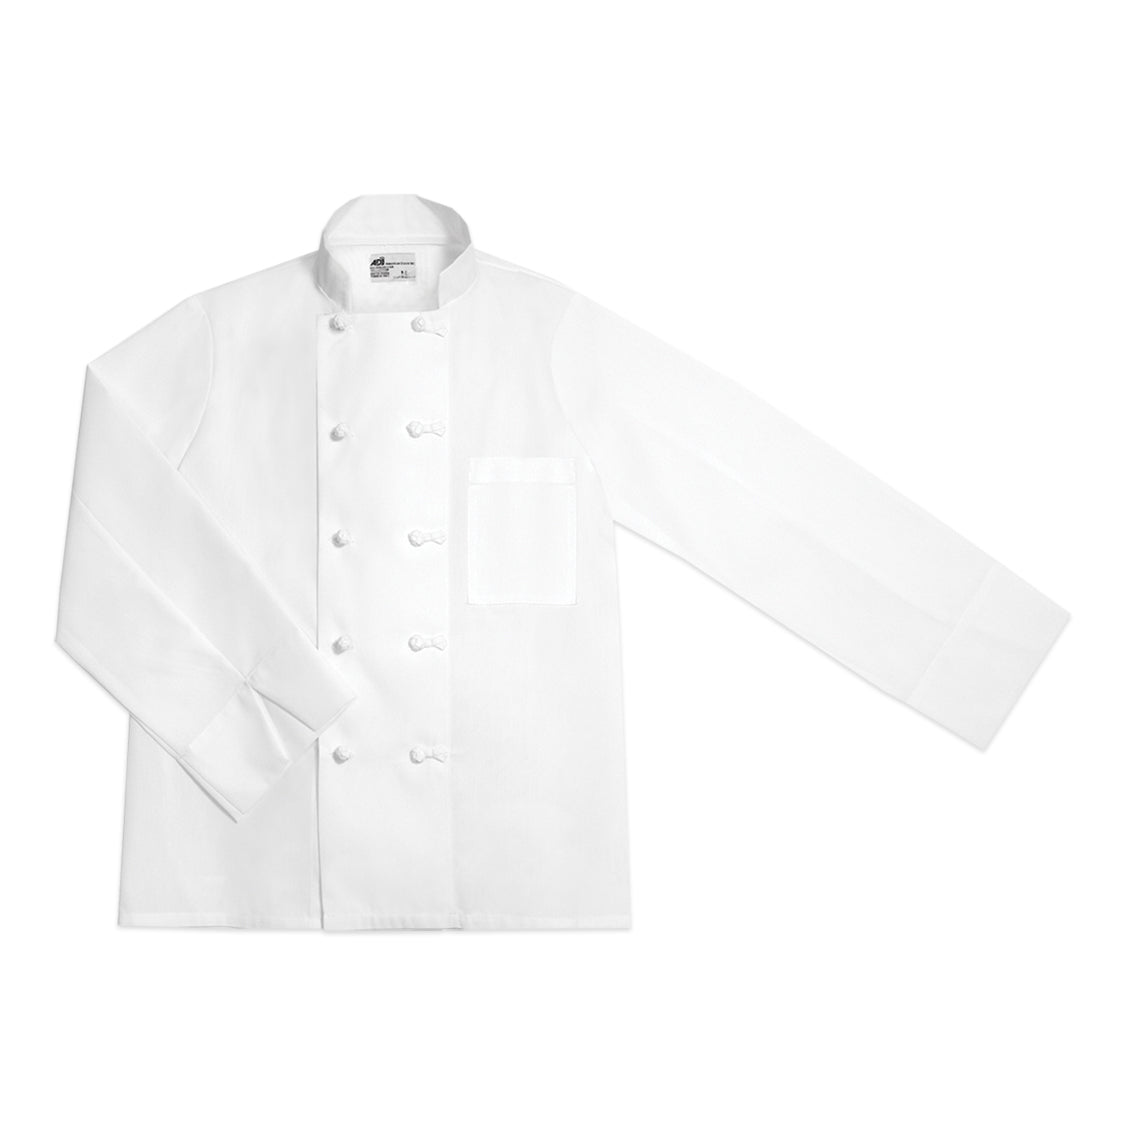 American Dawn | 2X-Large White Chef Coat With Knot Buttons, Long Sleeves And 2 Pockets